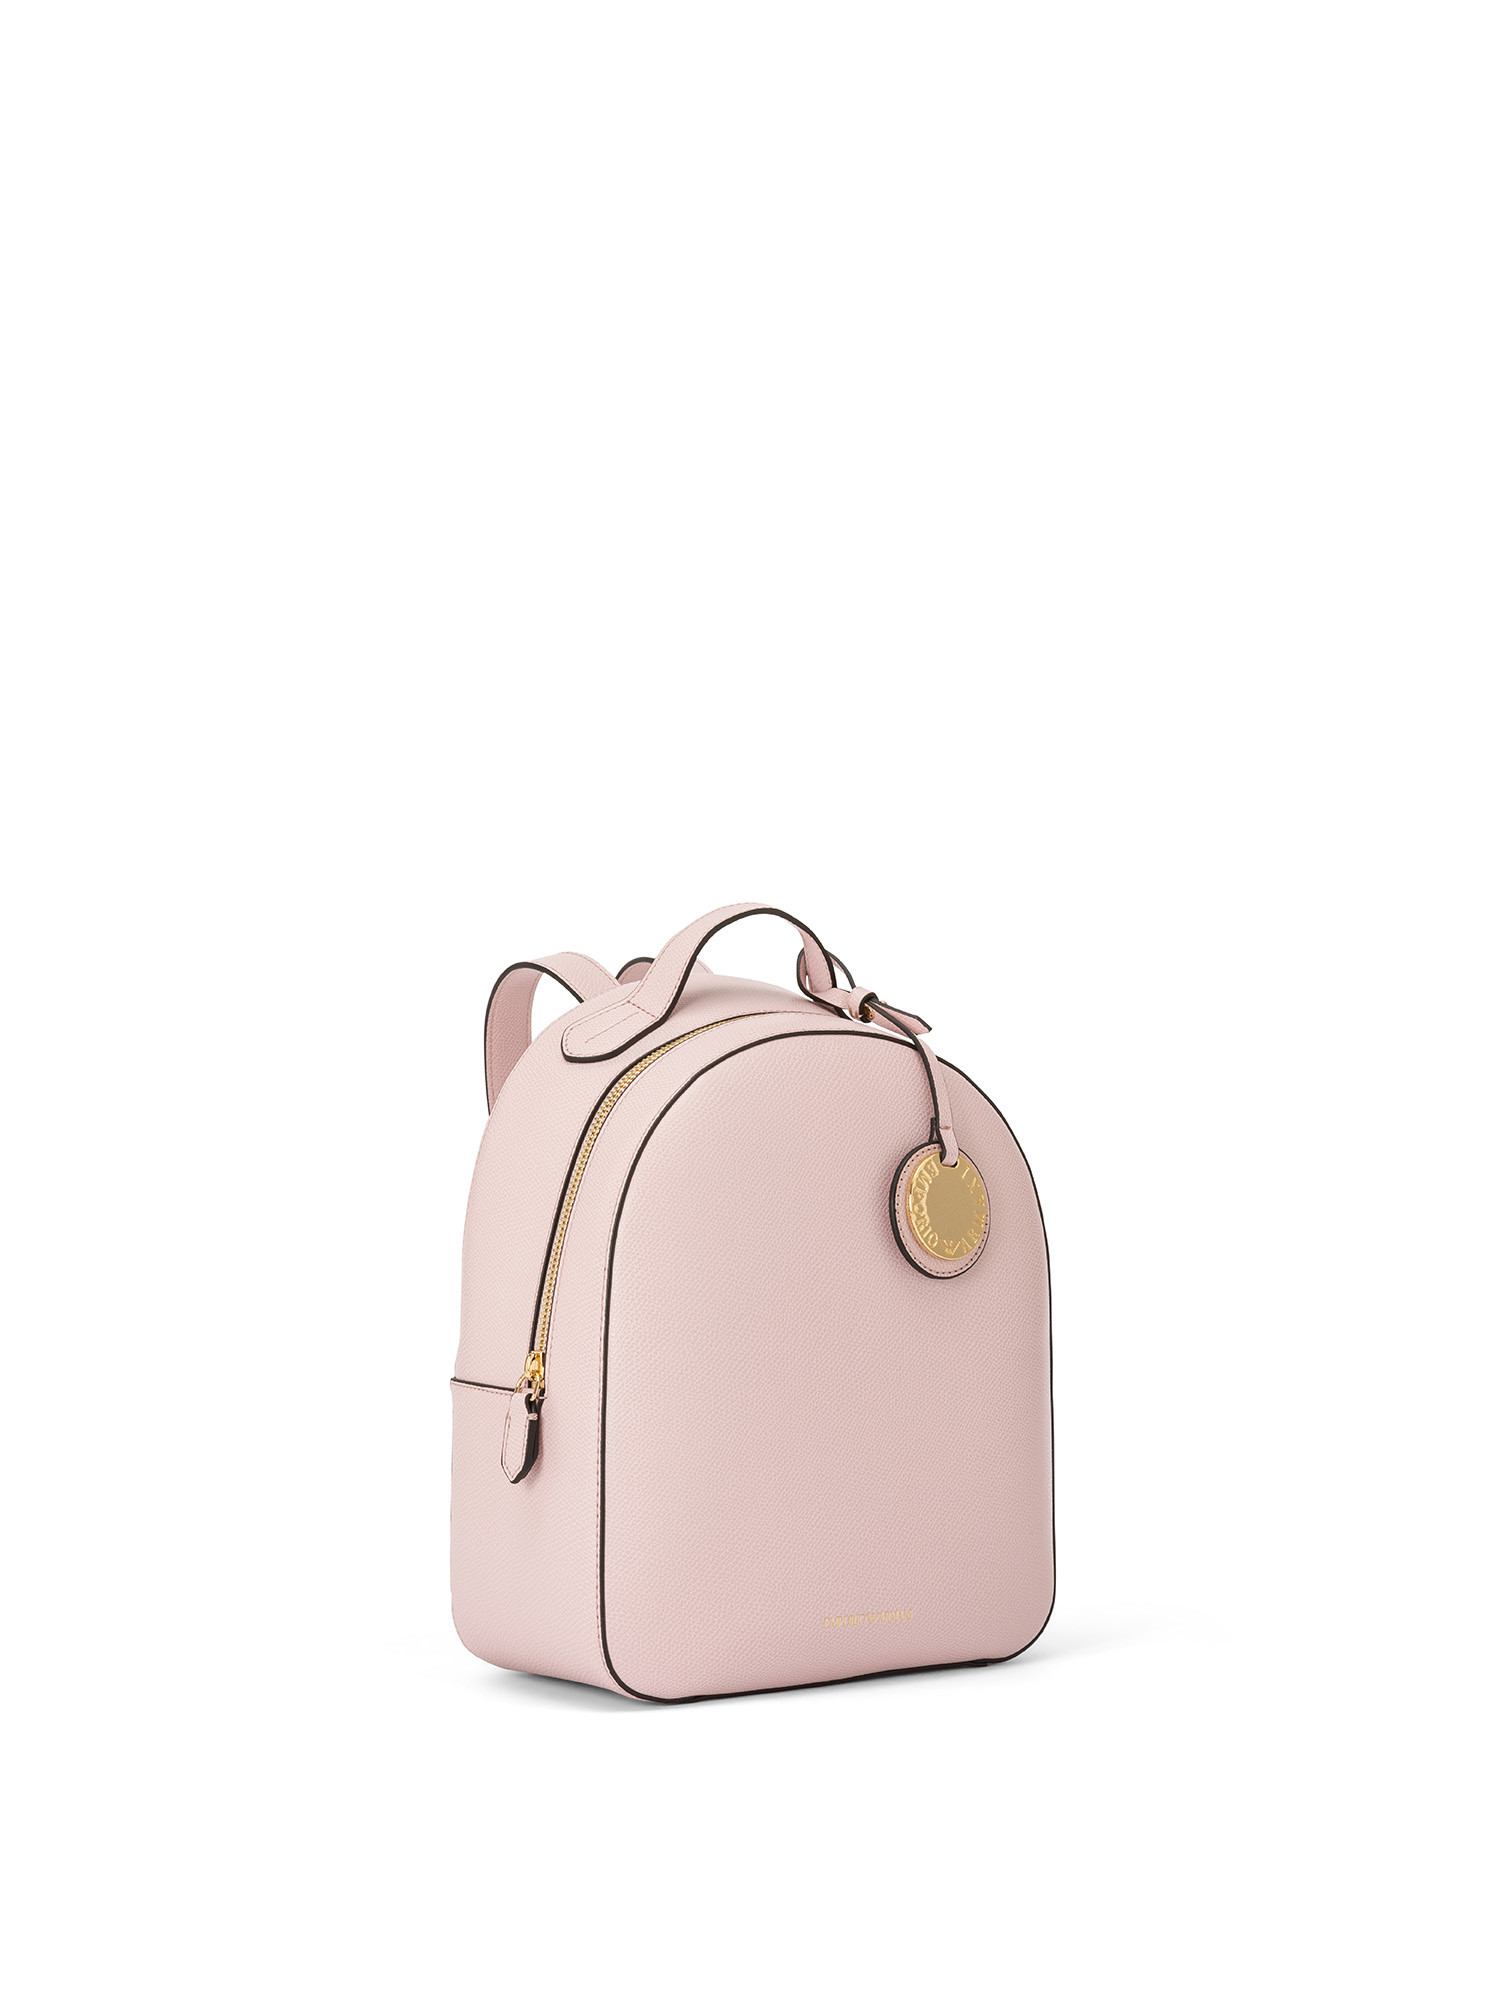 Emporio Armani - Backpack with charm, Pink, large image number 1